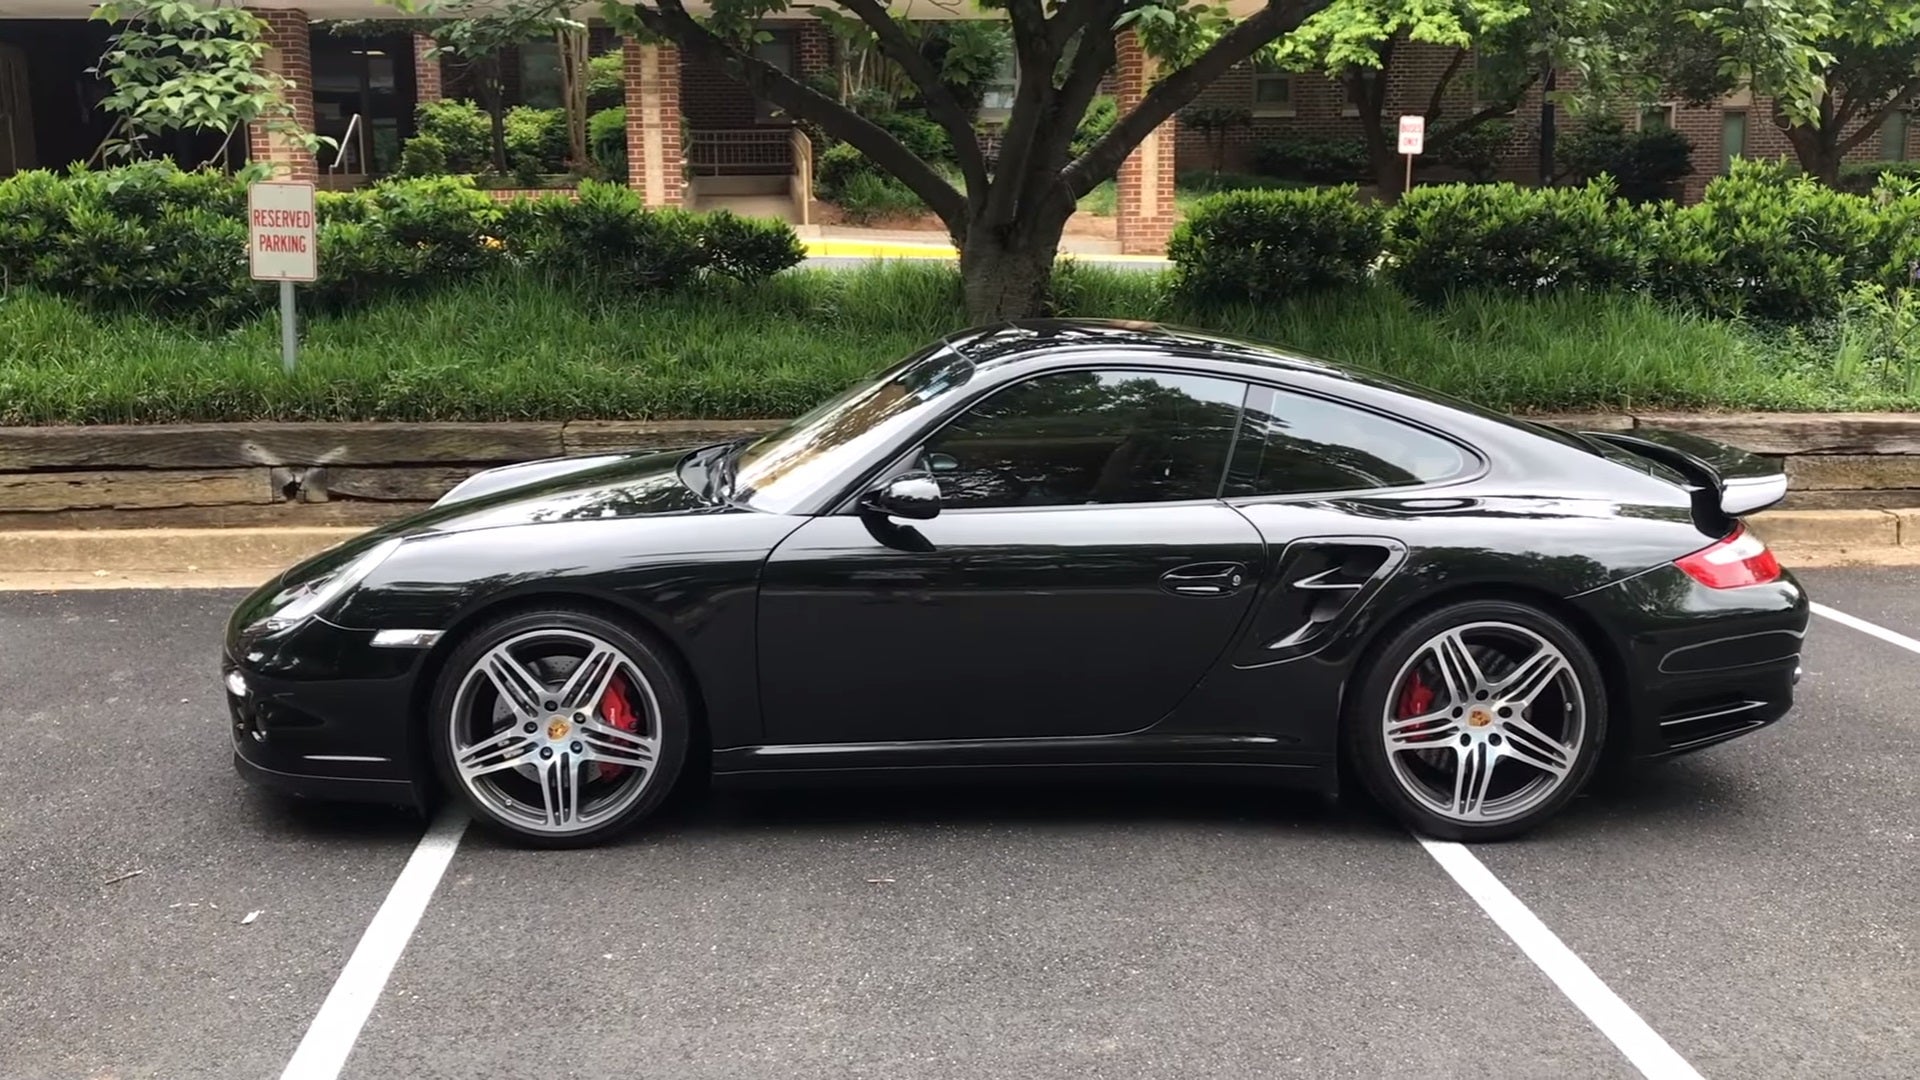 Porsche’s 997 Turbo Is The Best Bargain Supercar Right Now